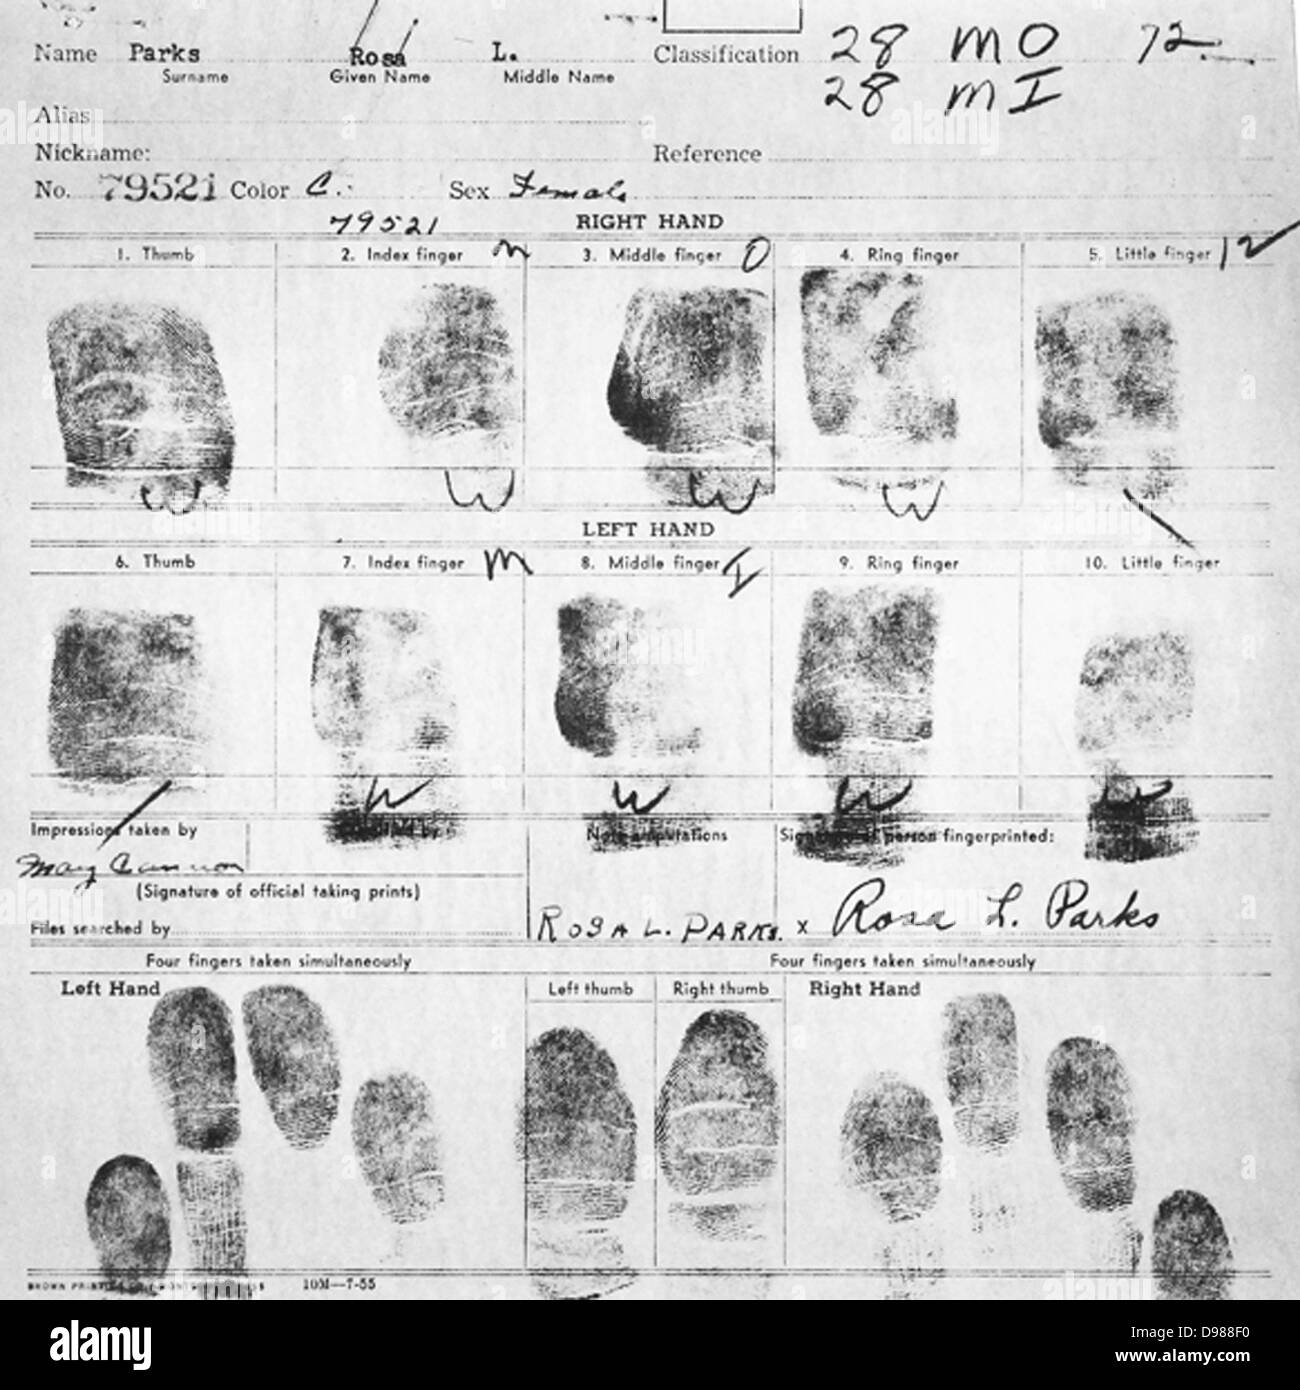 Fingerprint Card of Rosa Parks Civil Case 1147 Browder, et al v. Gayle, et. al; U.S. District Court for Middle District of Alabama, Northern (Montgomery) Division Record Group 21: Records of the District Court of the United States National Archives and Records Administration-Southeast Region, East Point, GA. 1955. Rosa Louise McCauley Parks (1813-2005), American Civil Rights activist was arrested for refusing to move from her seat on a segregated Montgomery bus on 1 December 1955. Stock Photo